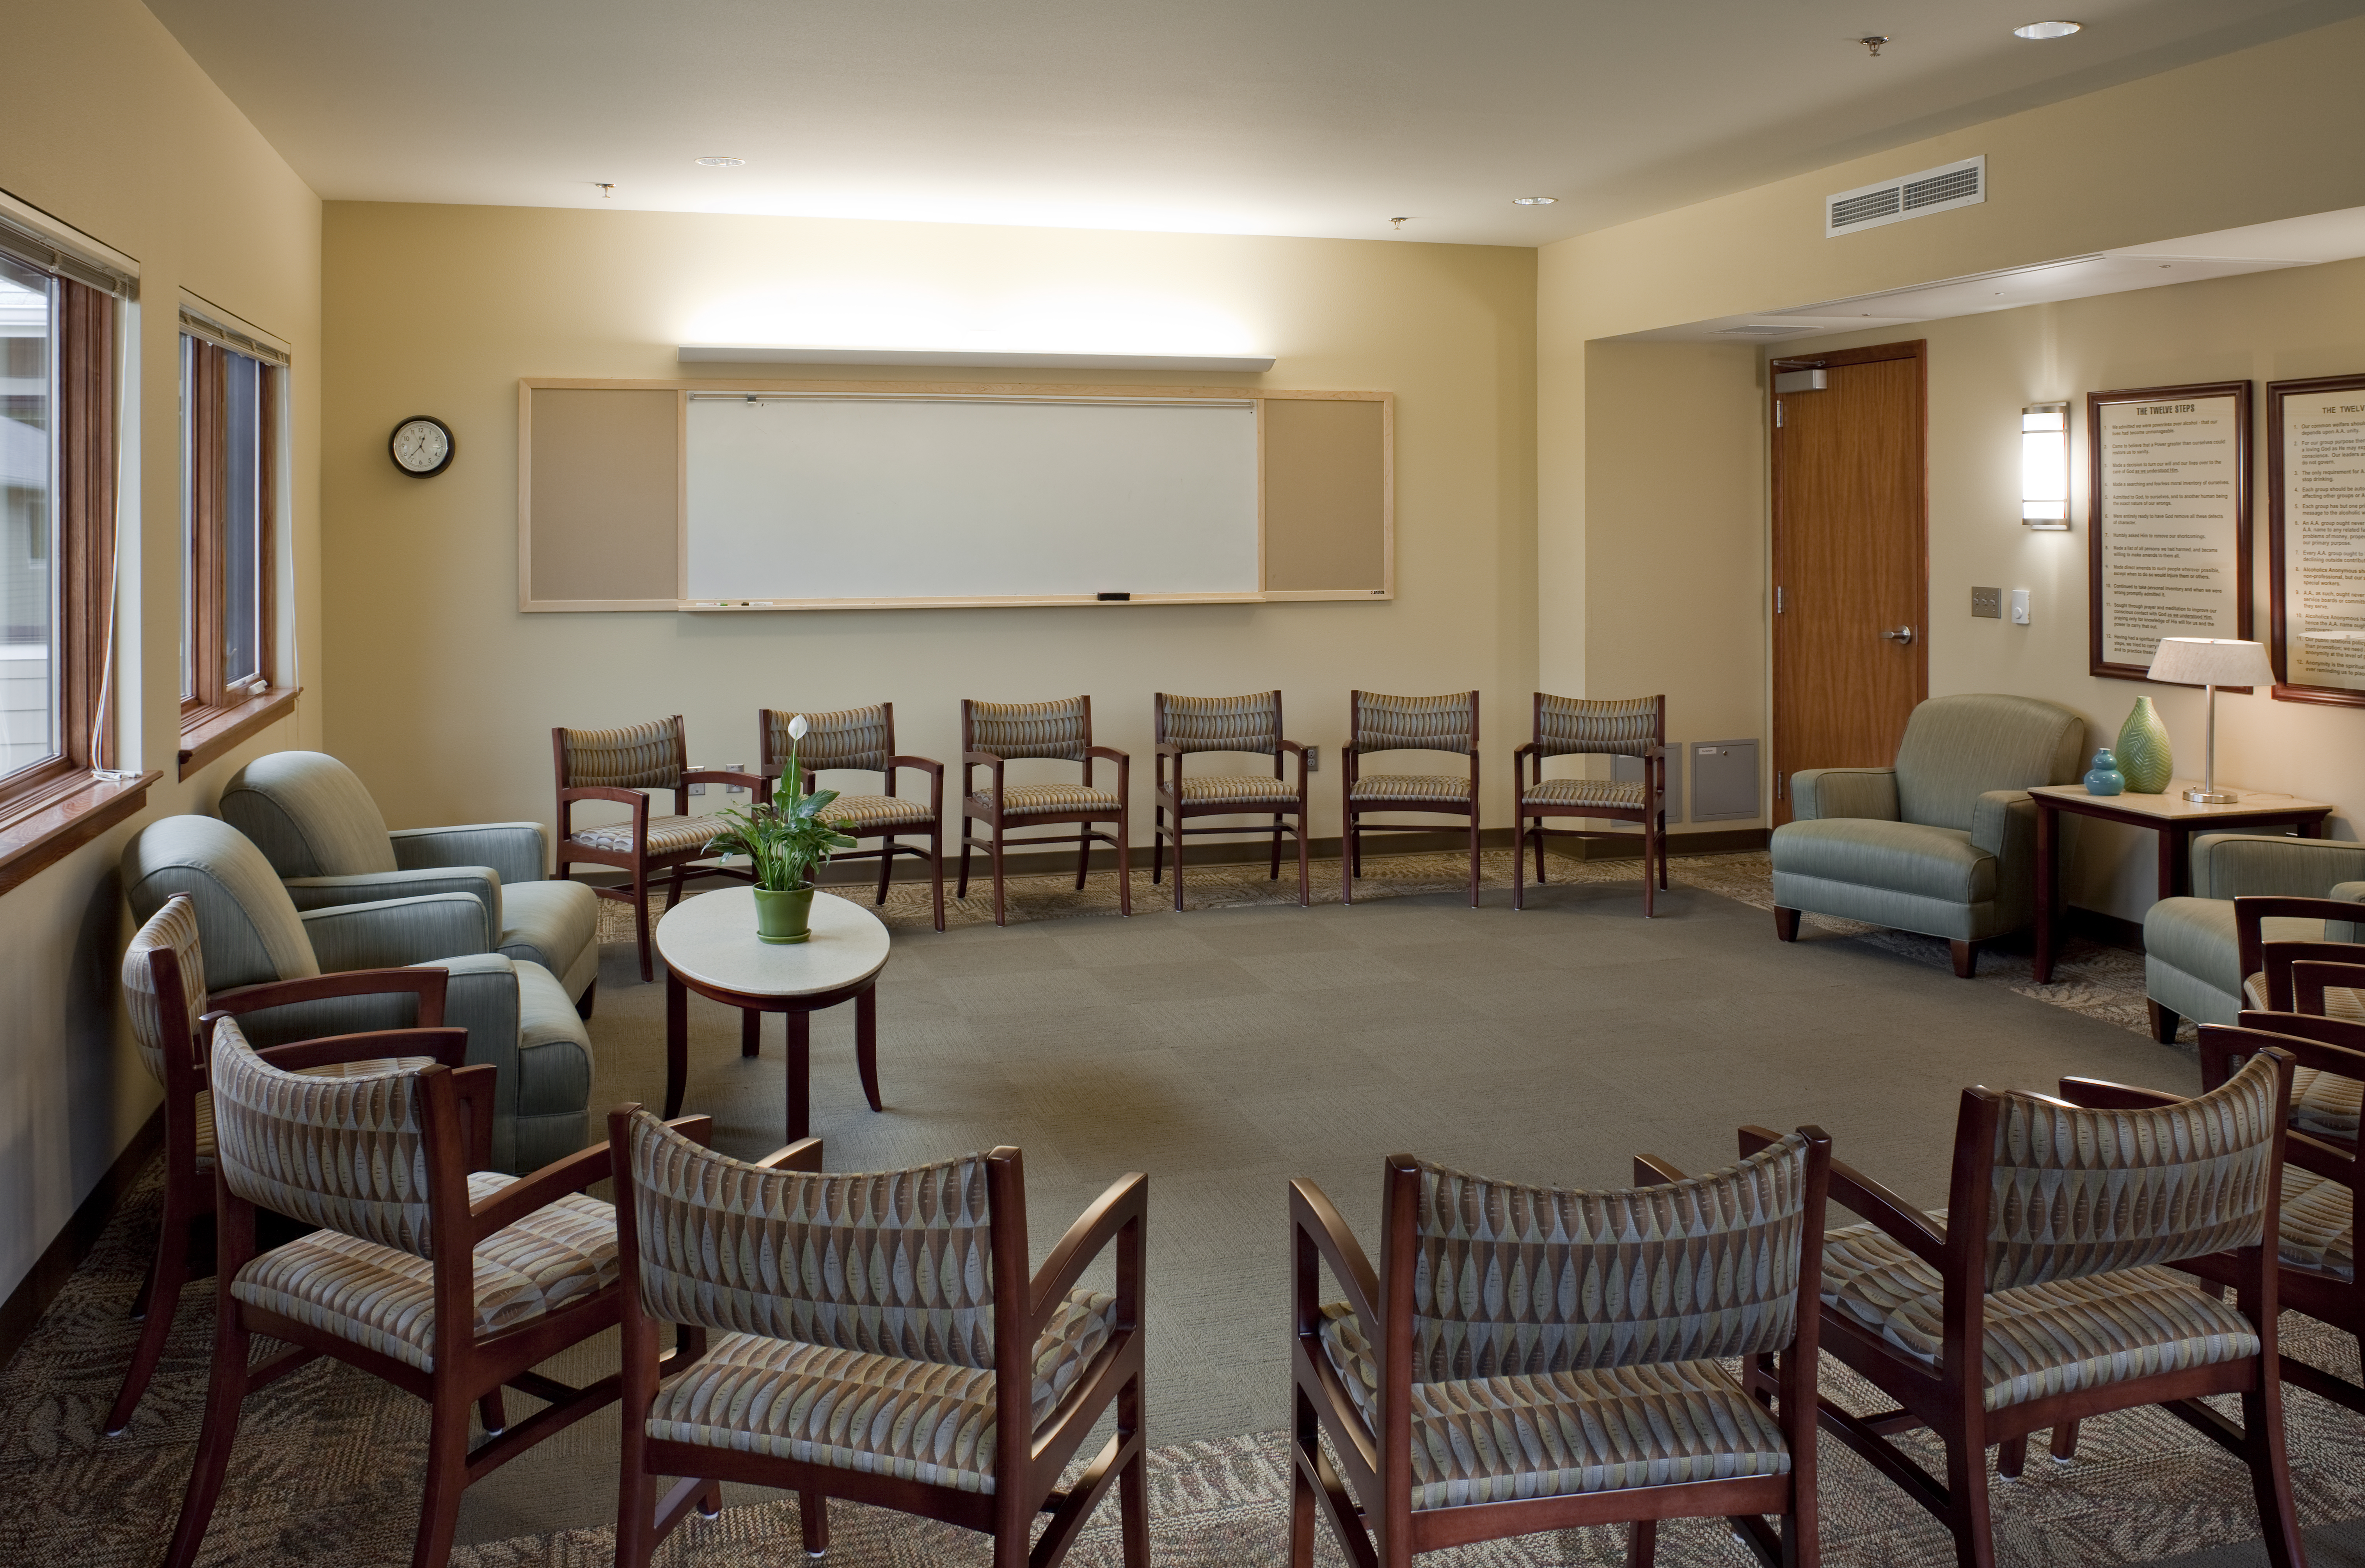 Inside the Newberg group meeting room with chairs arranged in a circle